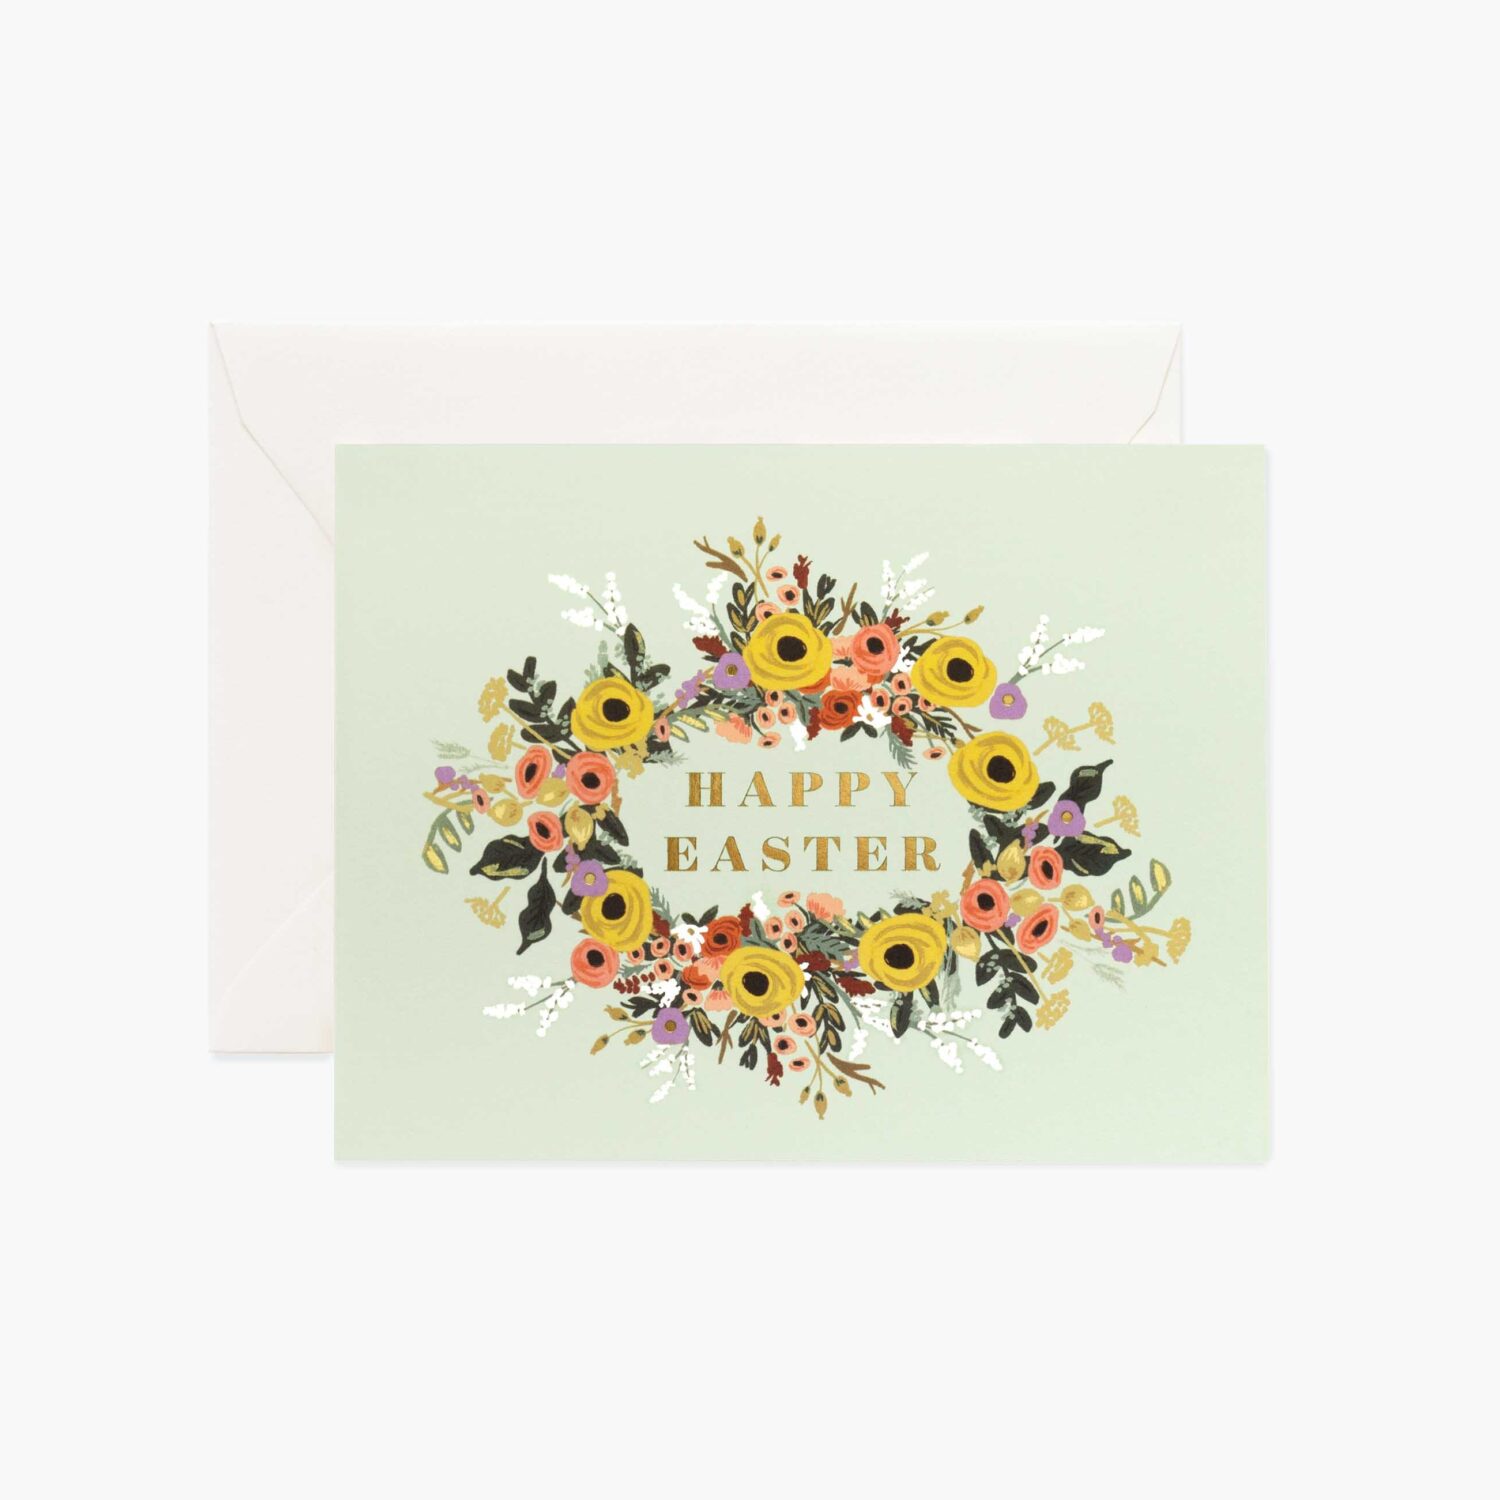 Rifle Paper Co. "Easter Garden" Greeting Card